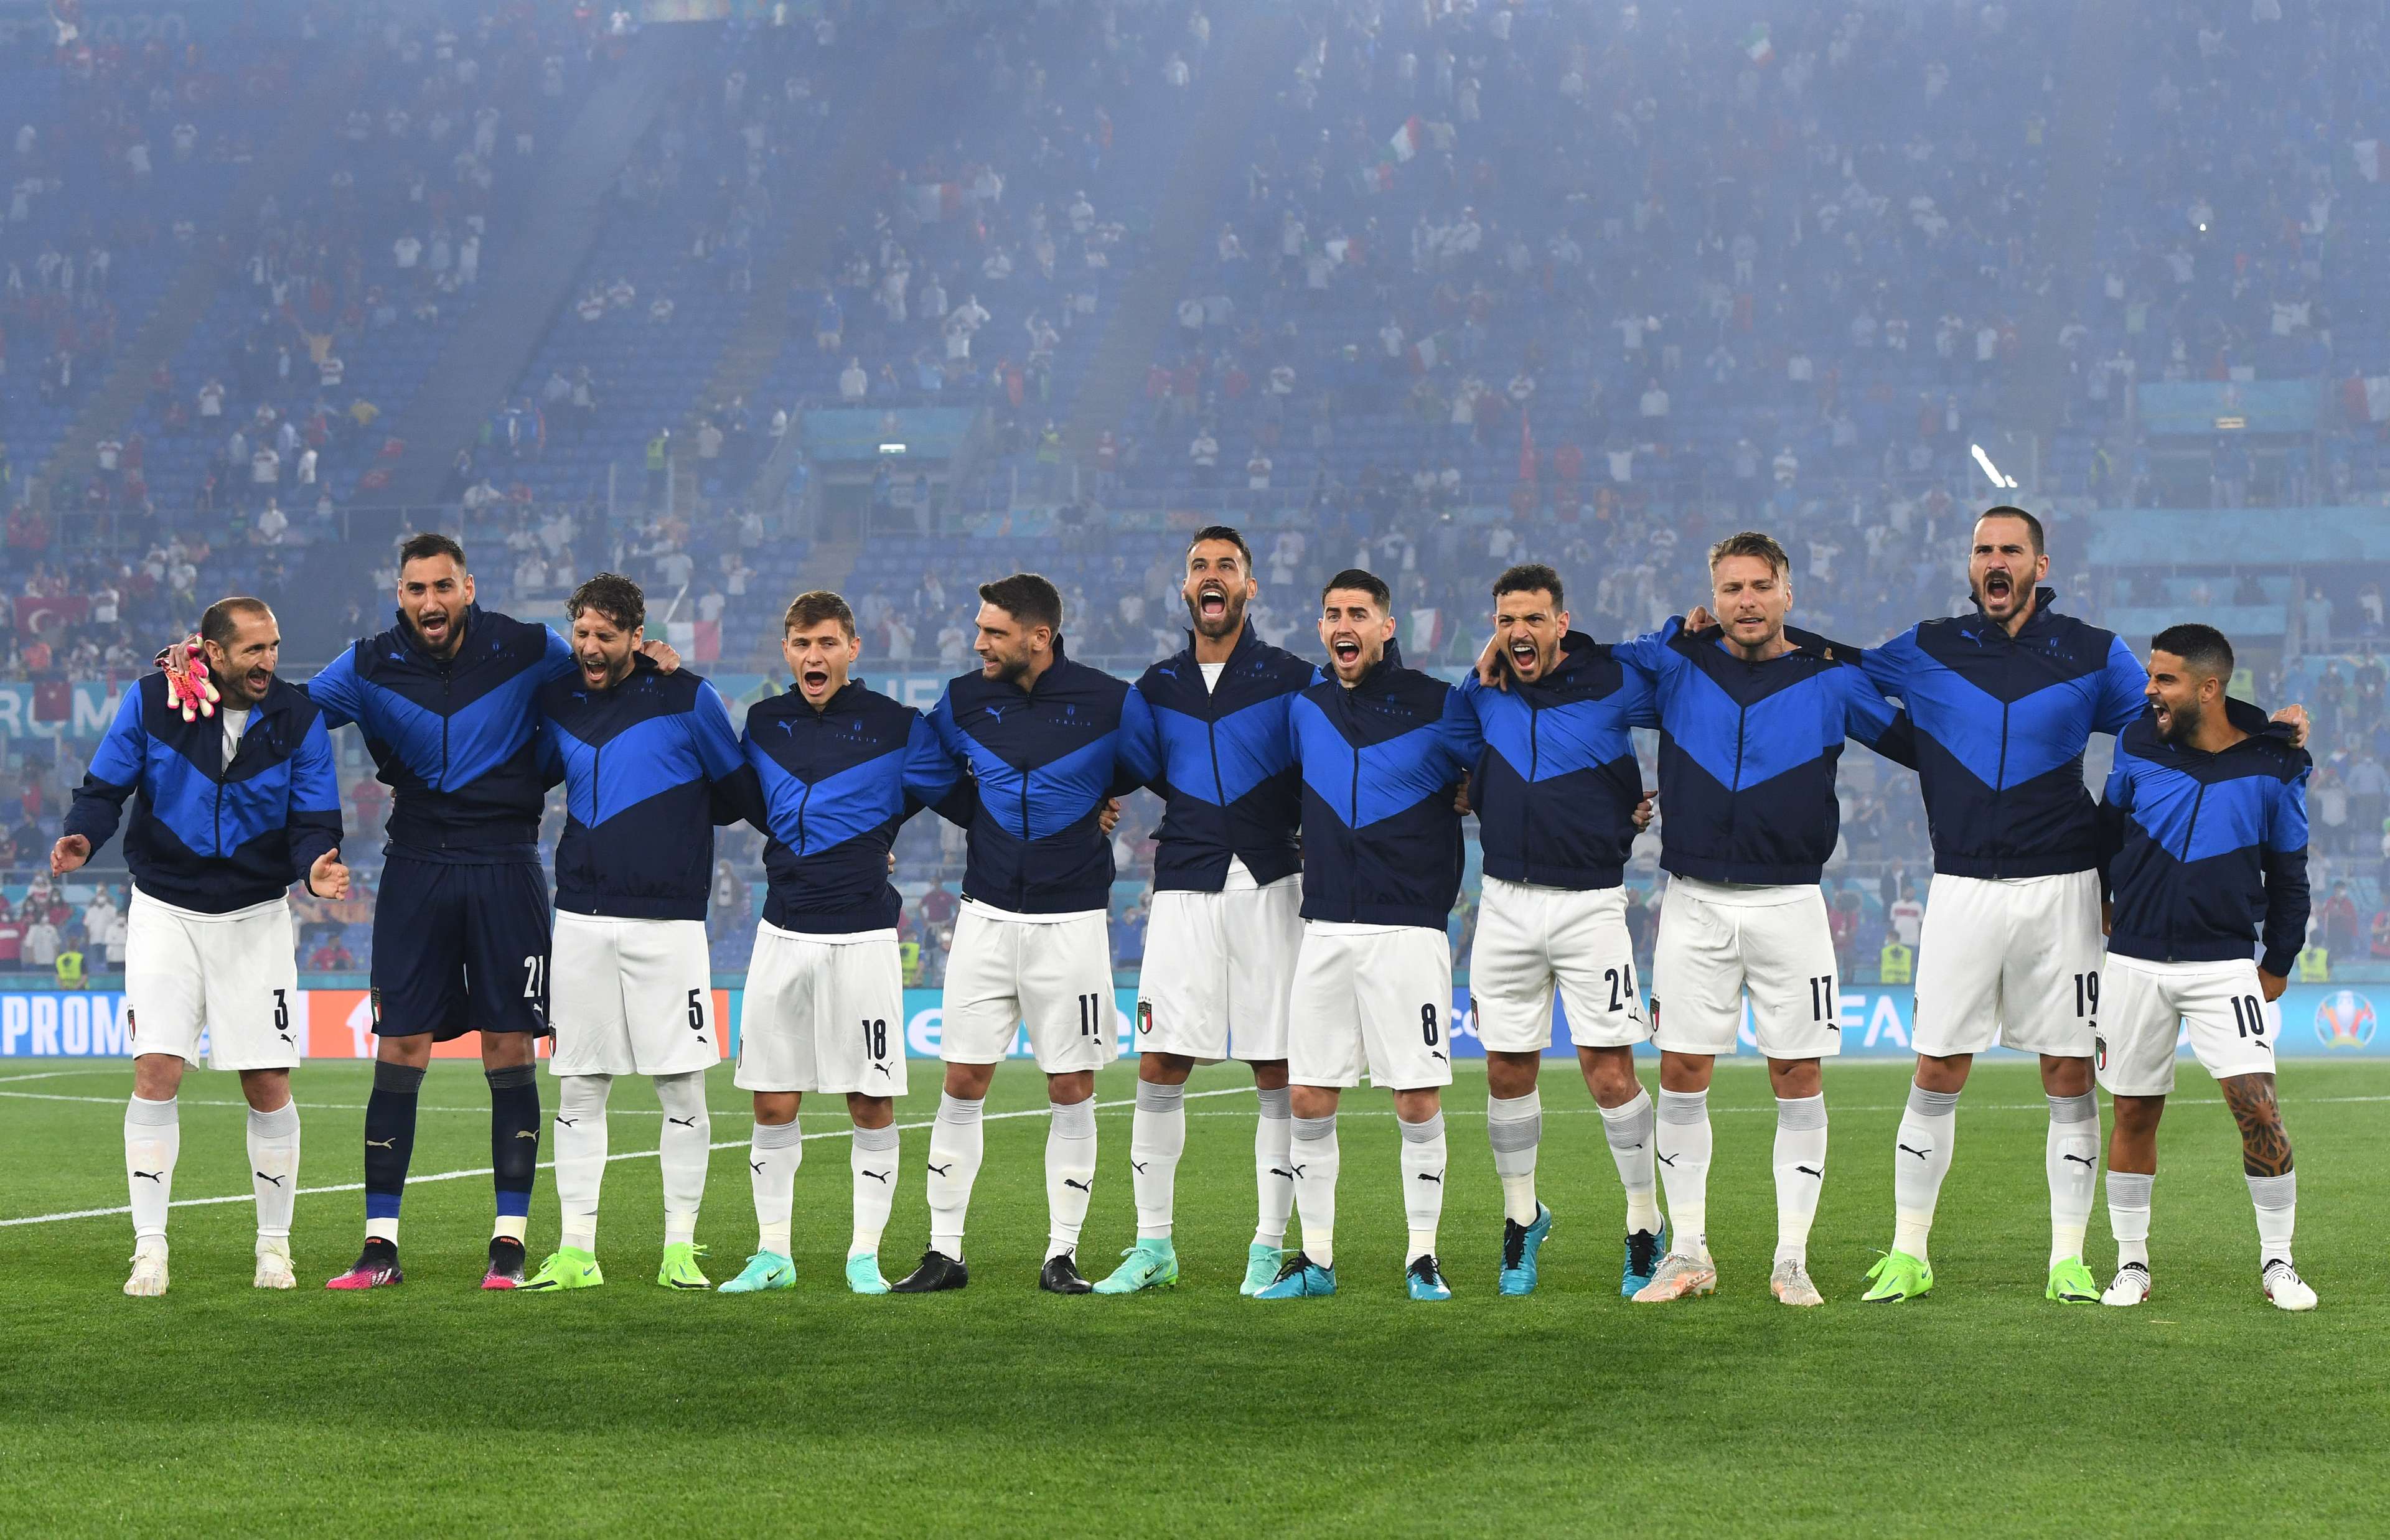 layers of Italy sing the national anthem prior vs. Turkey 06/11/21